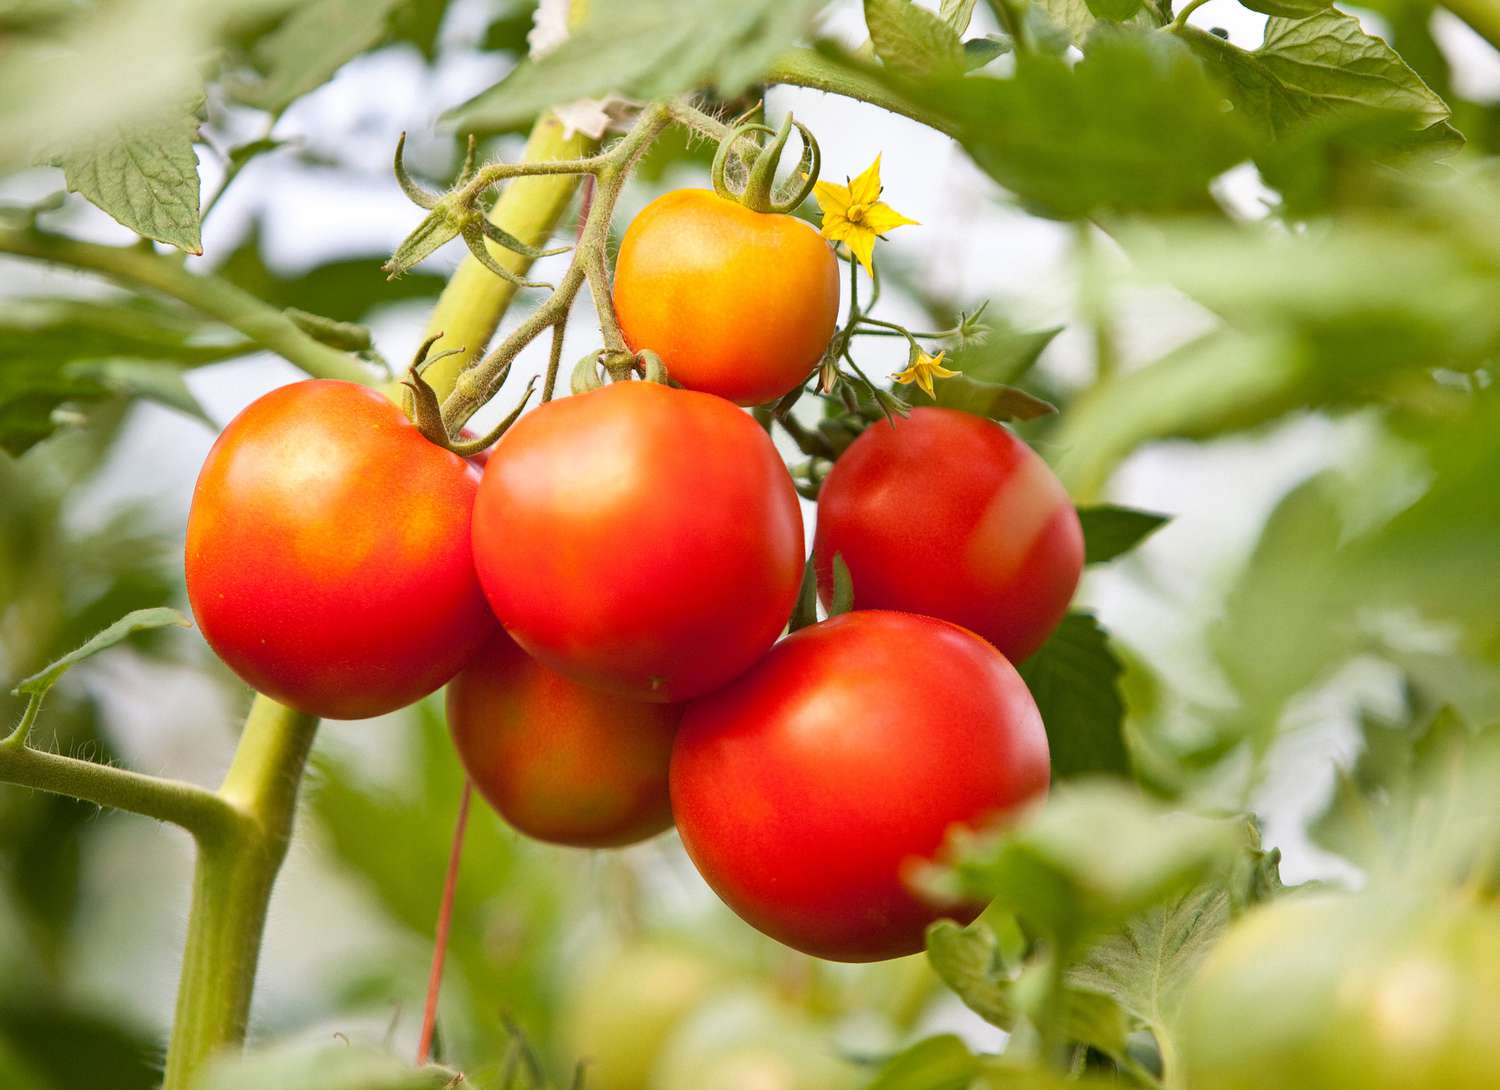 How to Prune a Tomato Plant, According to Experts [Video]